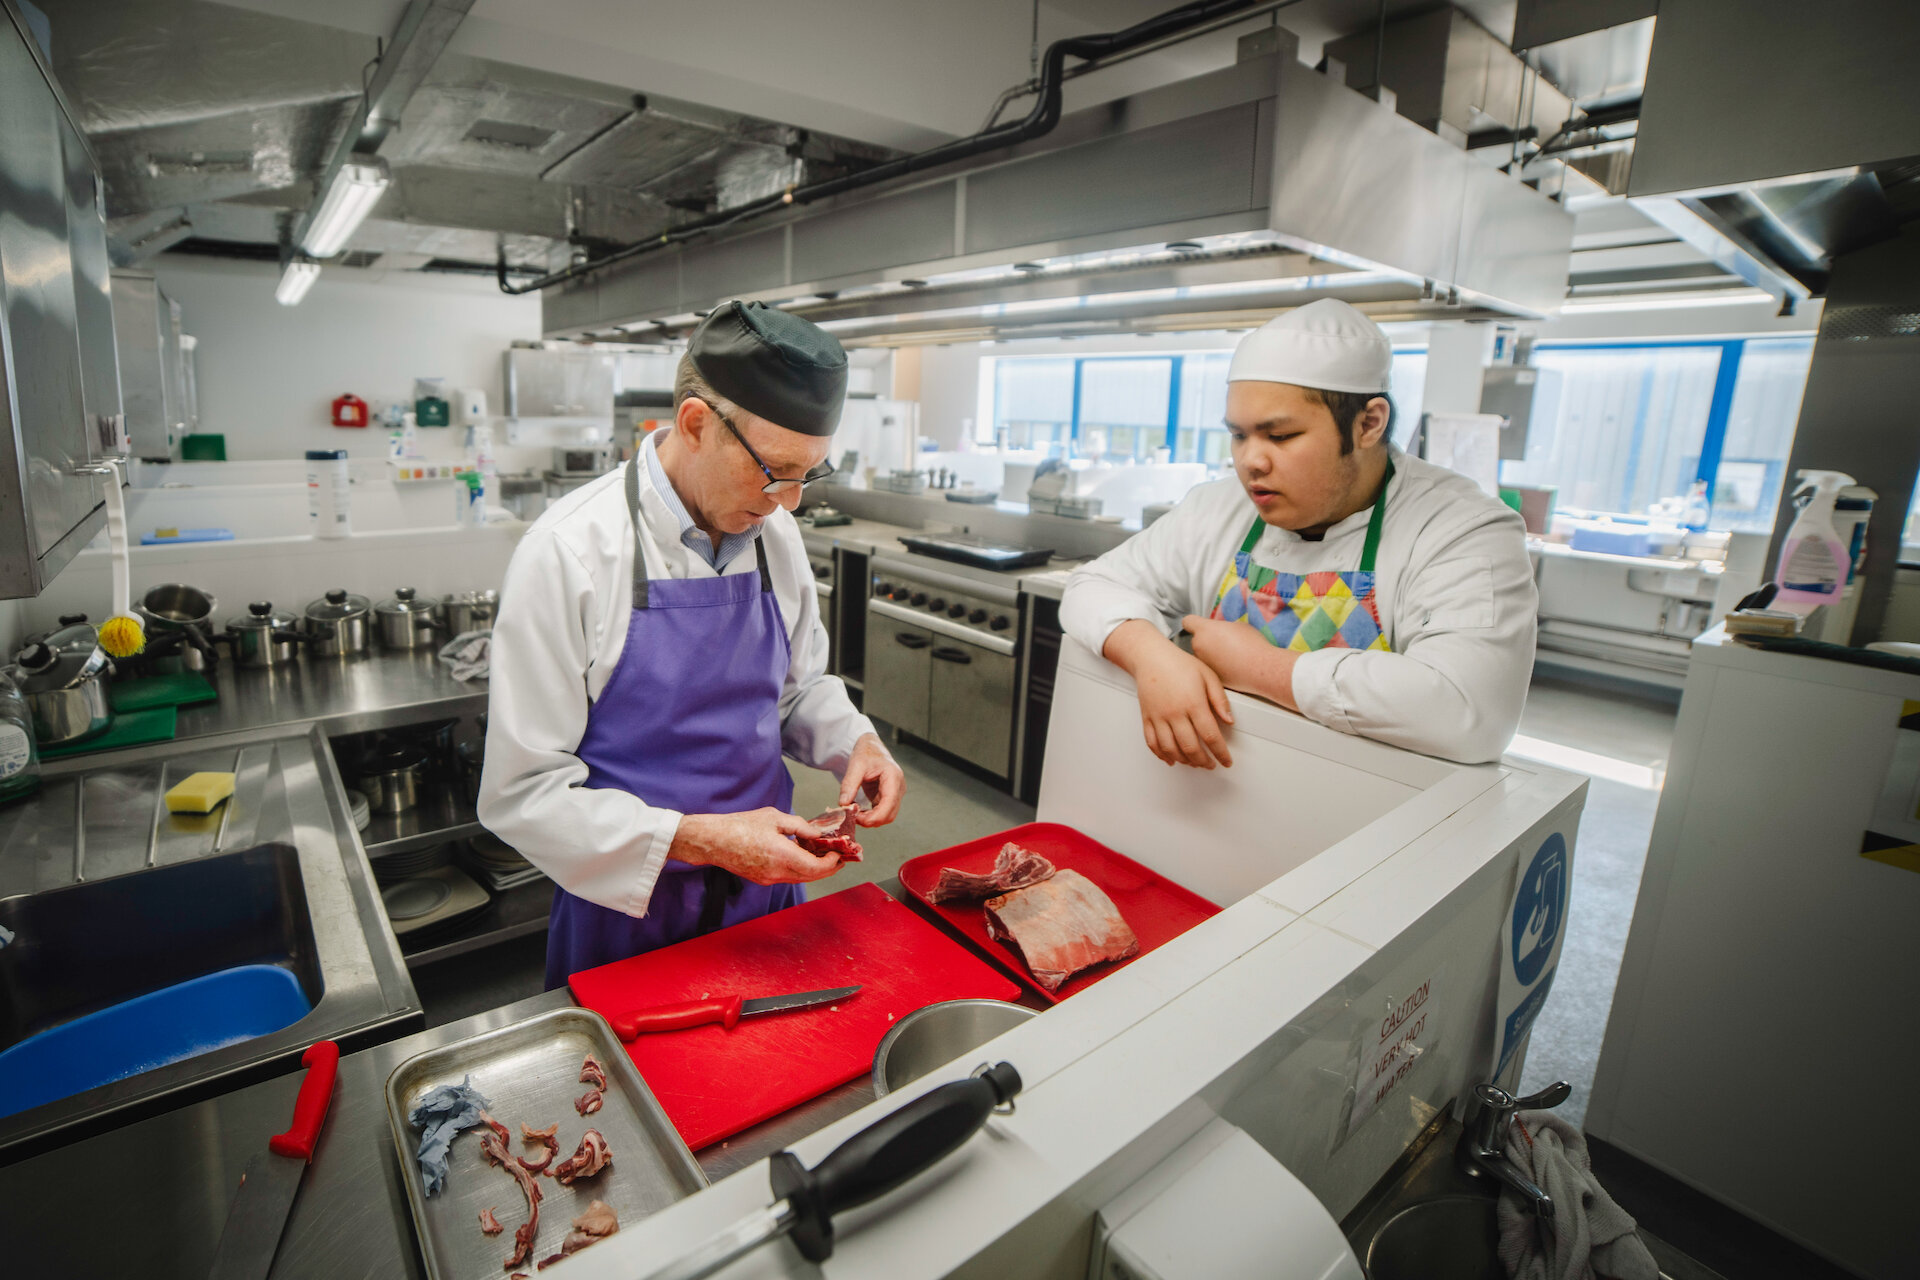 Experienced tutors offer expert advice to catering and hospitality students in professional standard kitchens.